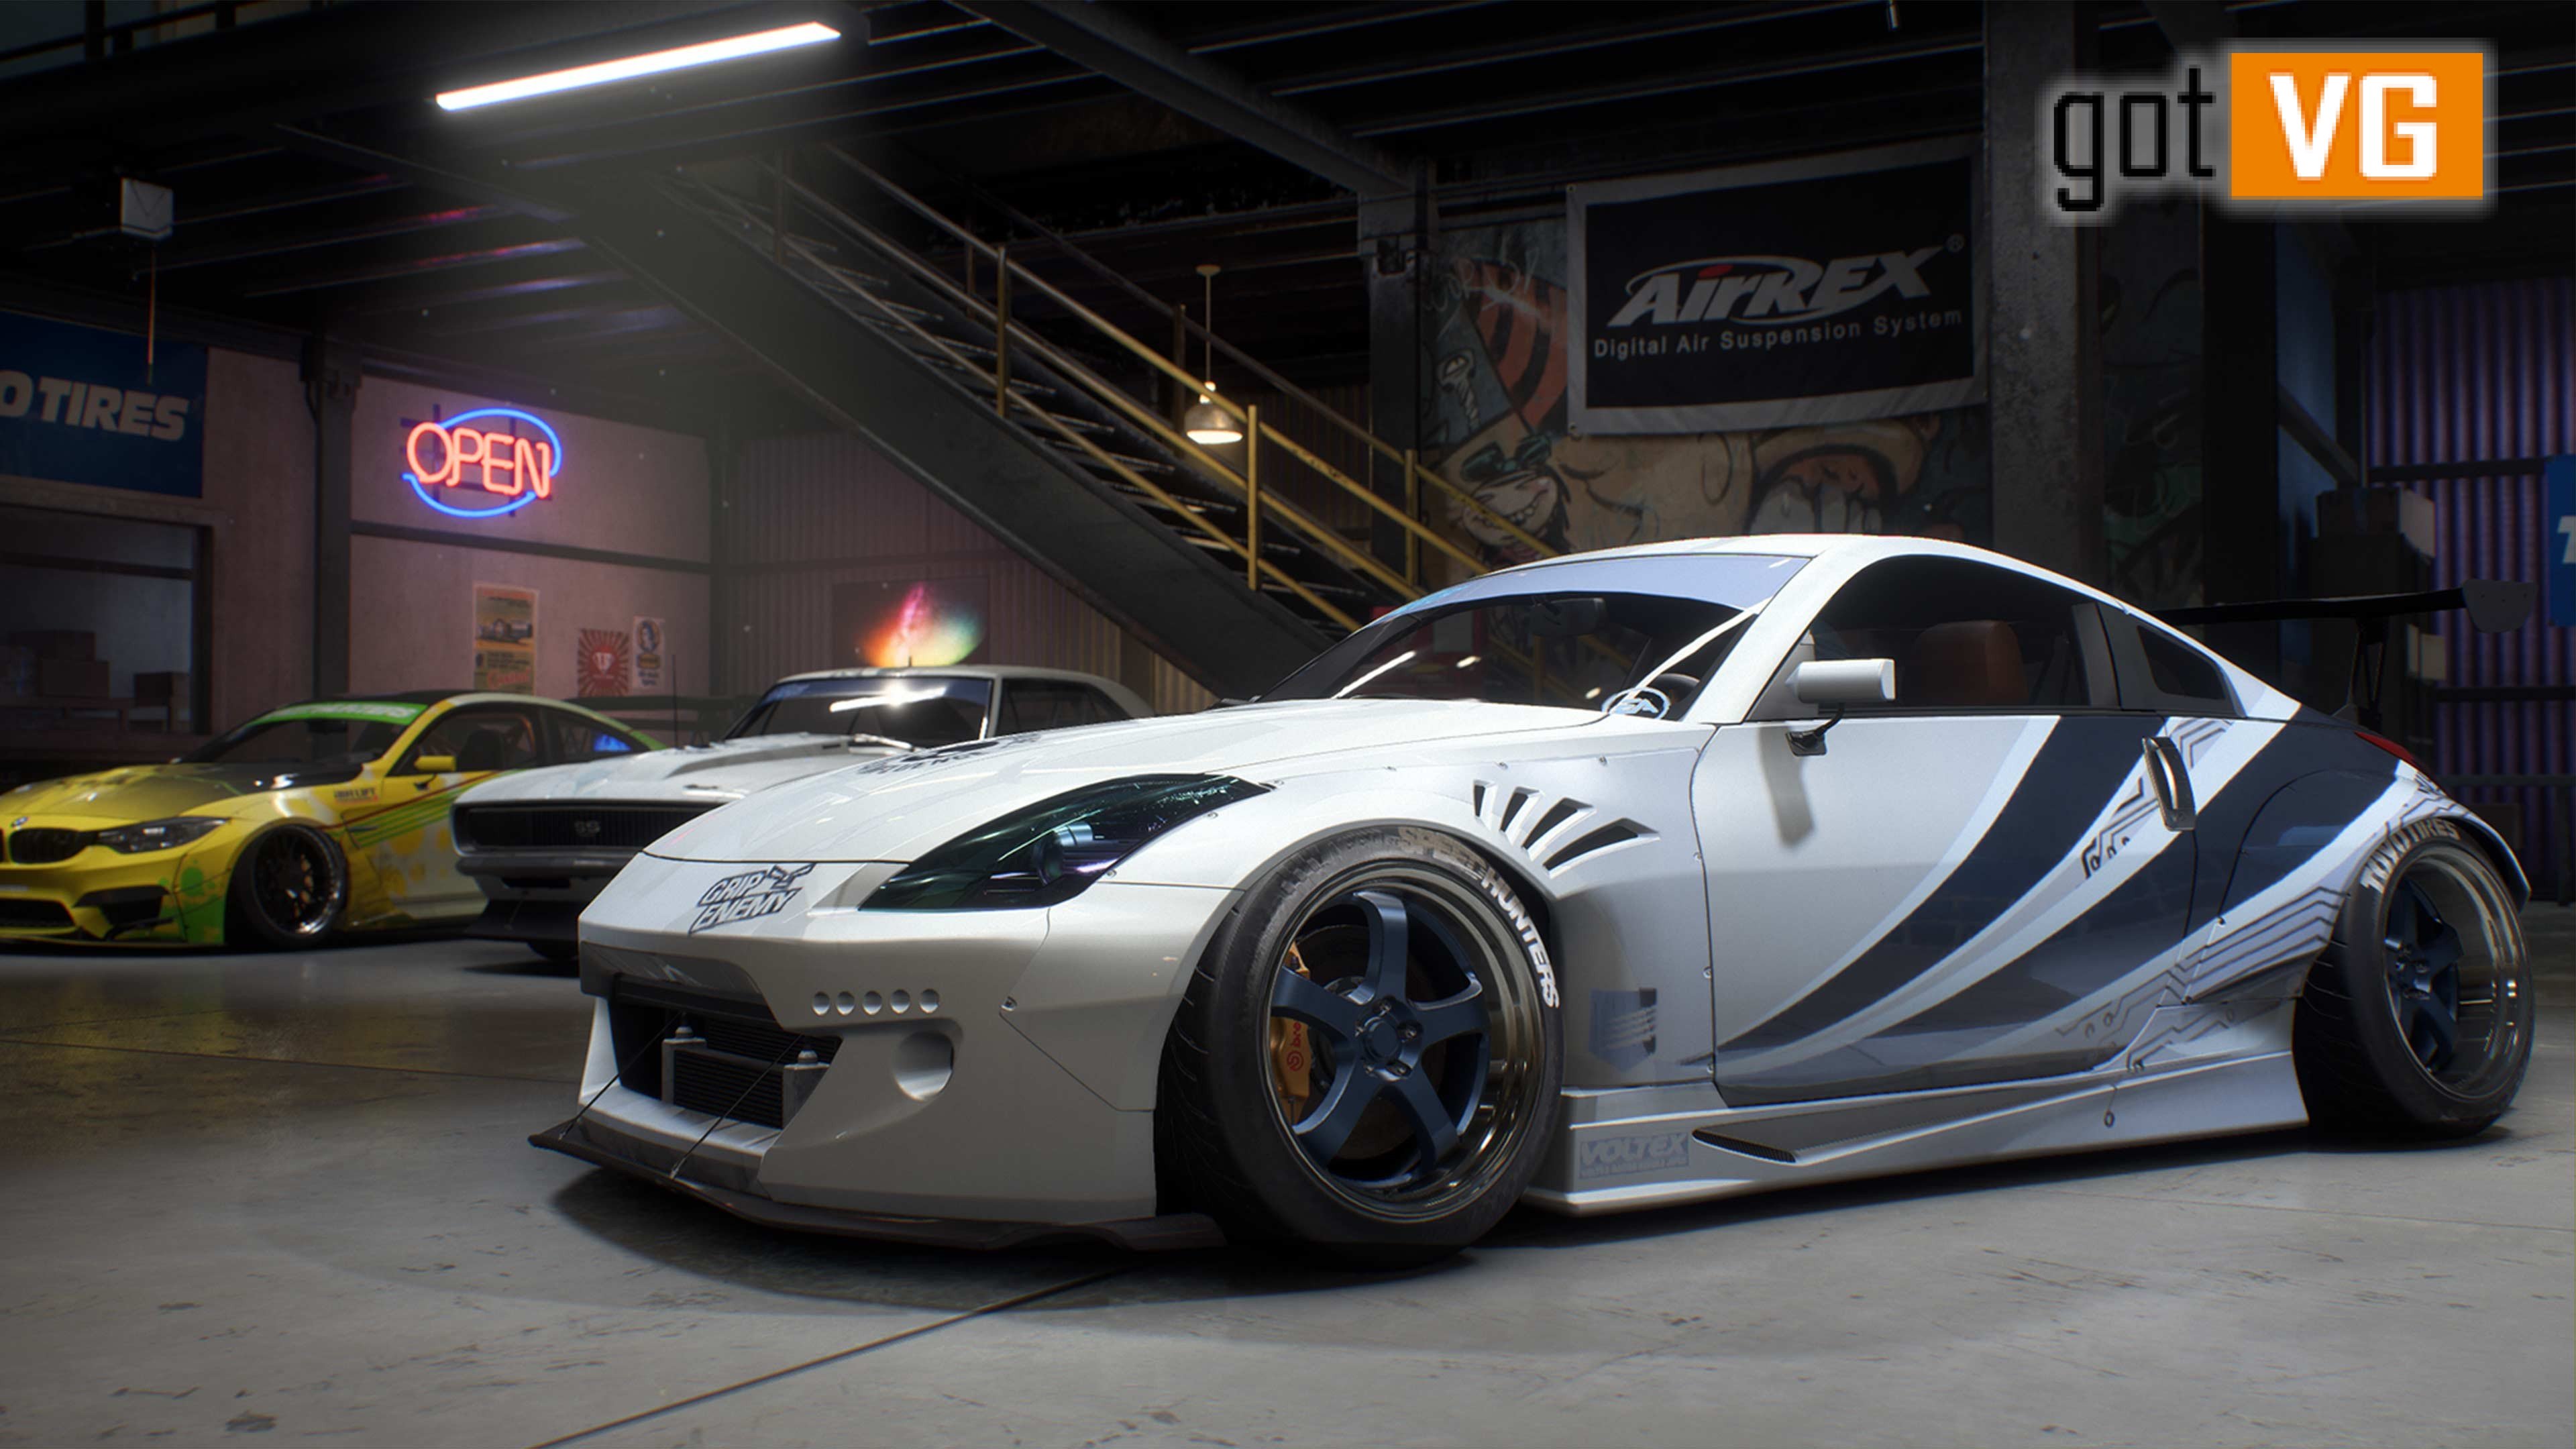 Need for speed playback. Nissan 350z Payback. Nissan 350z NFS. Need for Speed Payback Nissan 350z. Nissan 350z тюнинг NFS.